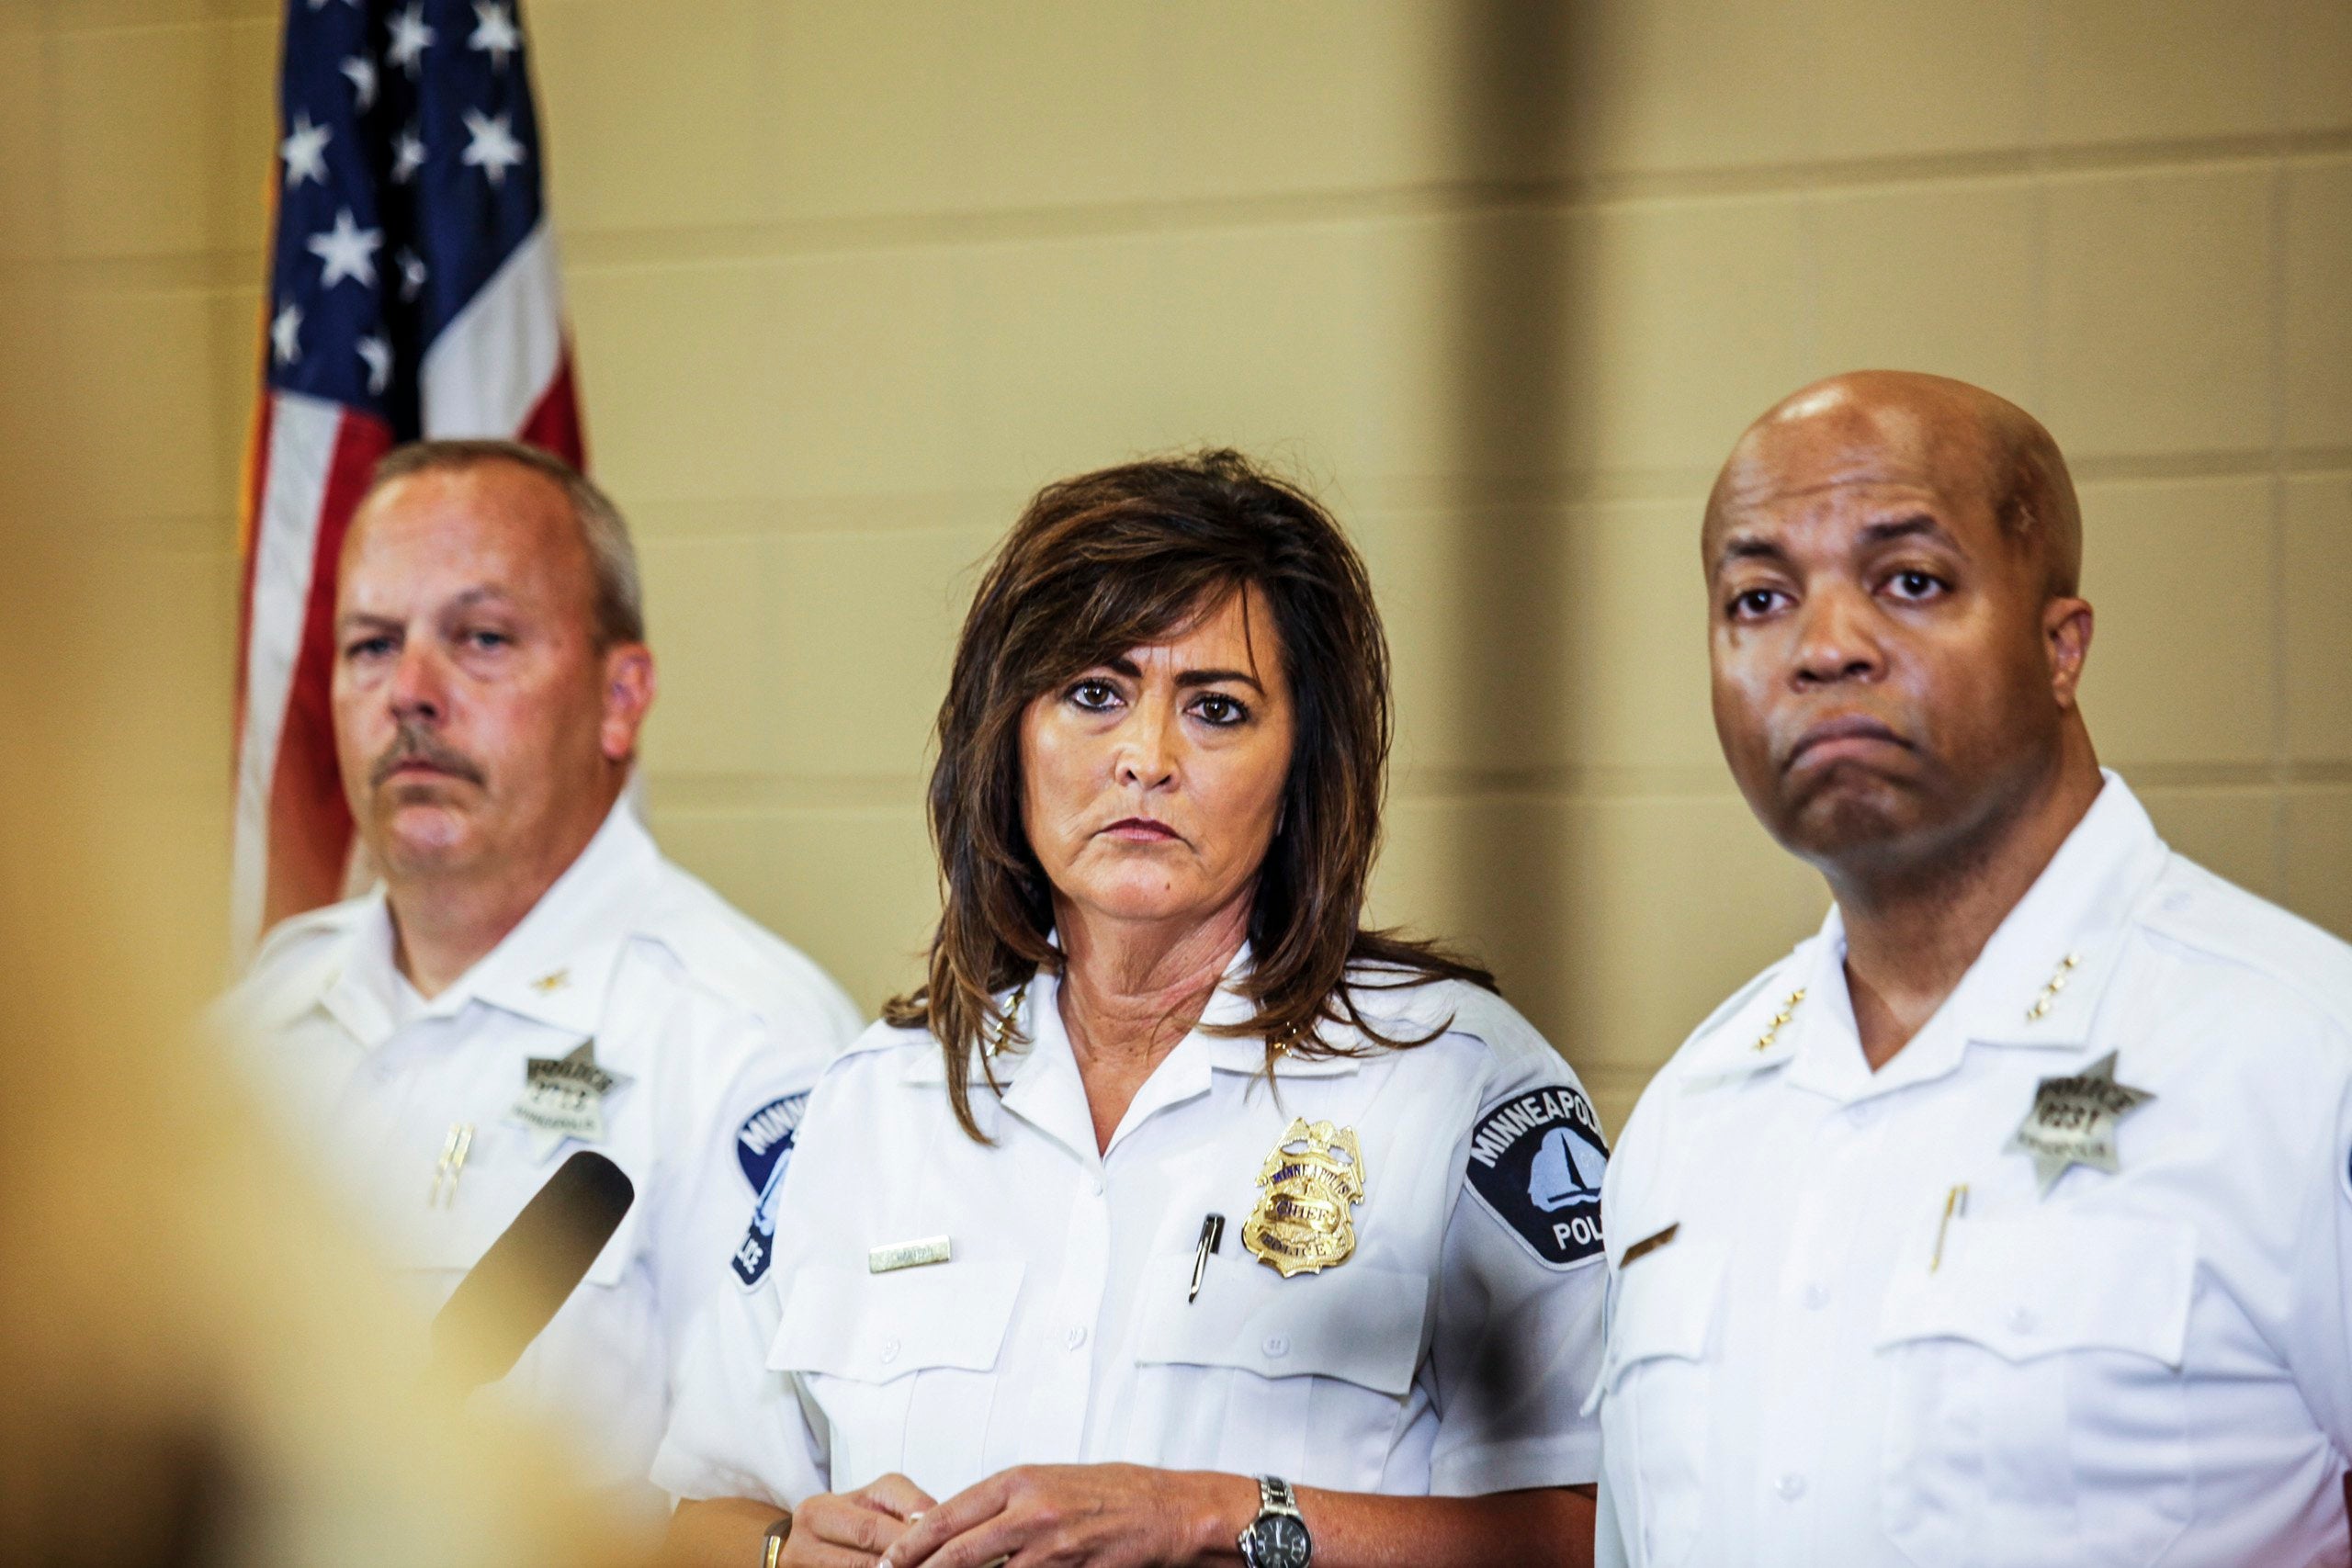 Minneapolis Police Chief Janee Harteau Resigns After Fatal Shooting of Justine Diamond